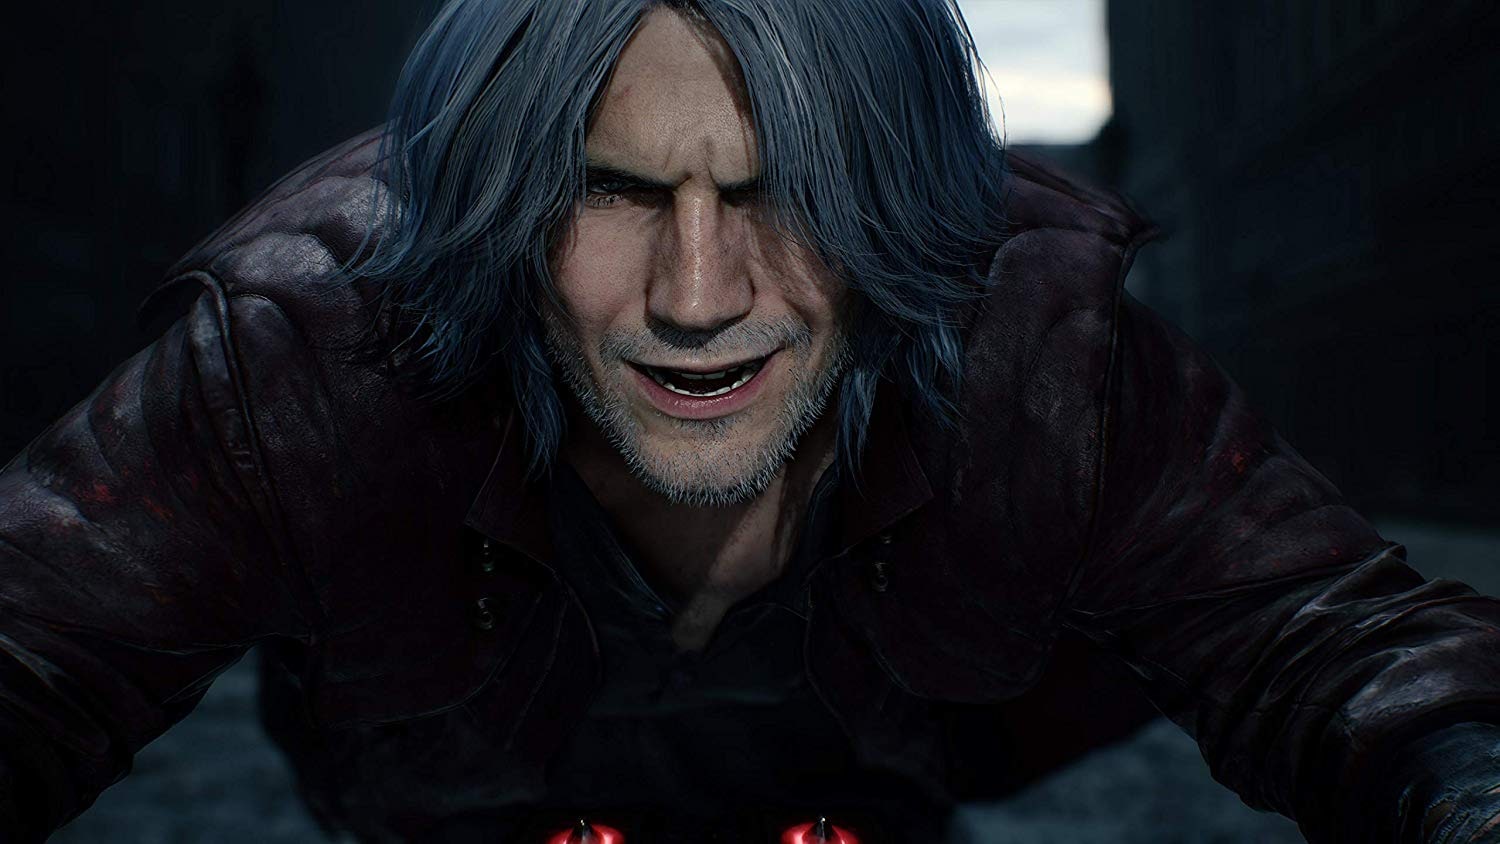 PS4 DEVIL MAY CRY 5 R3 CHN/ENG - 4